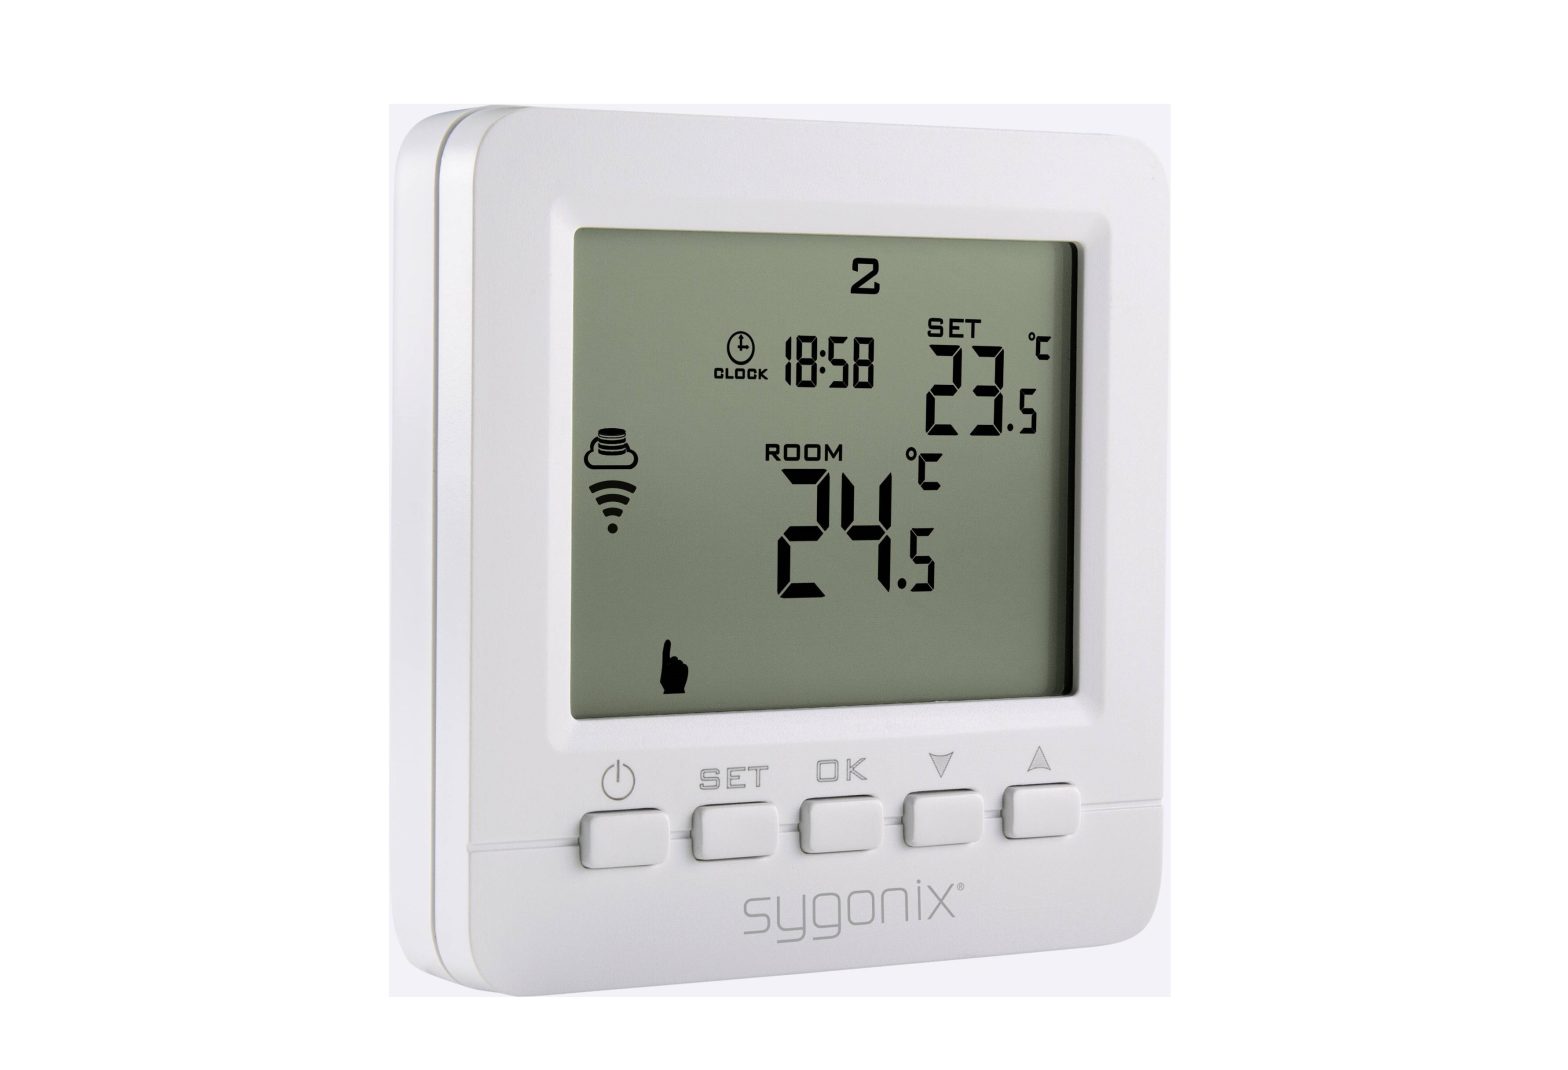 Sygonix Heating Thermostat with WiFi and Sensor Instruction Manual